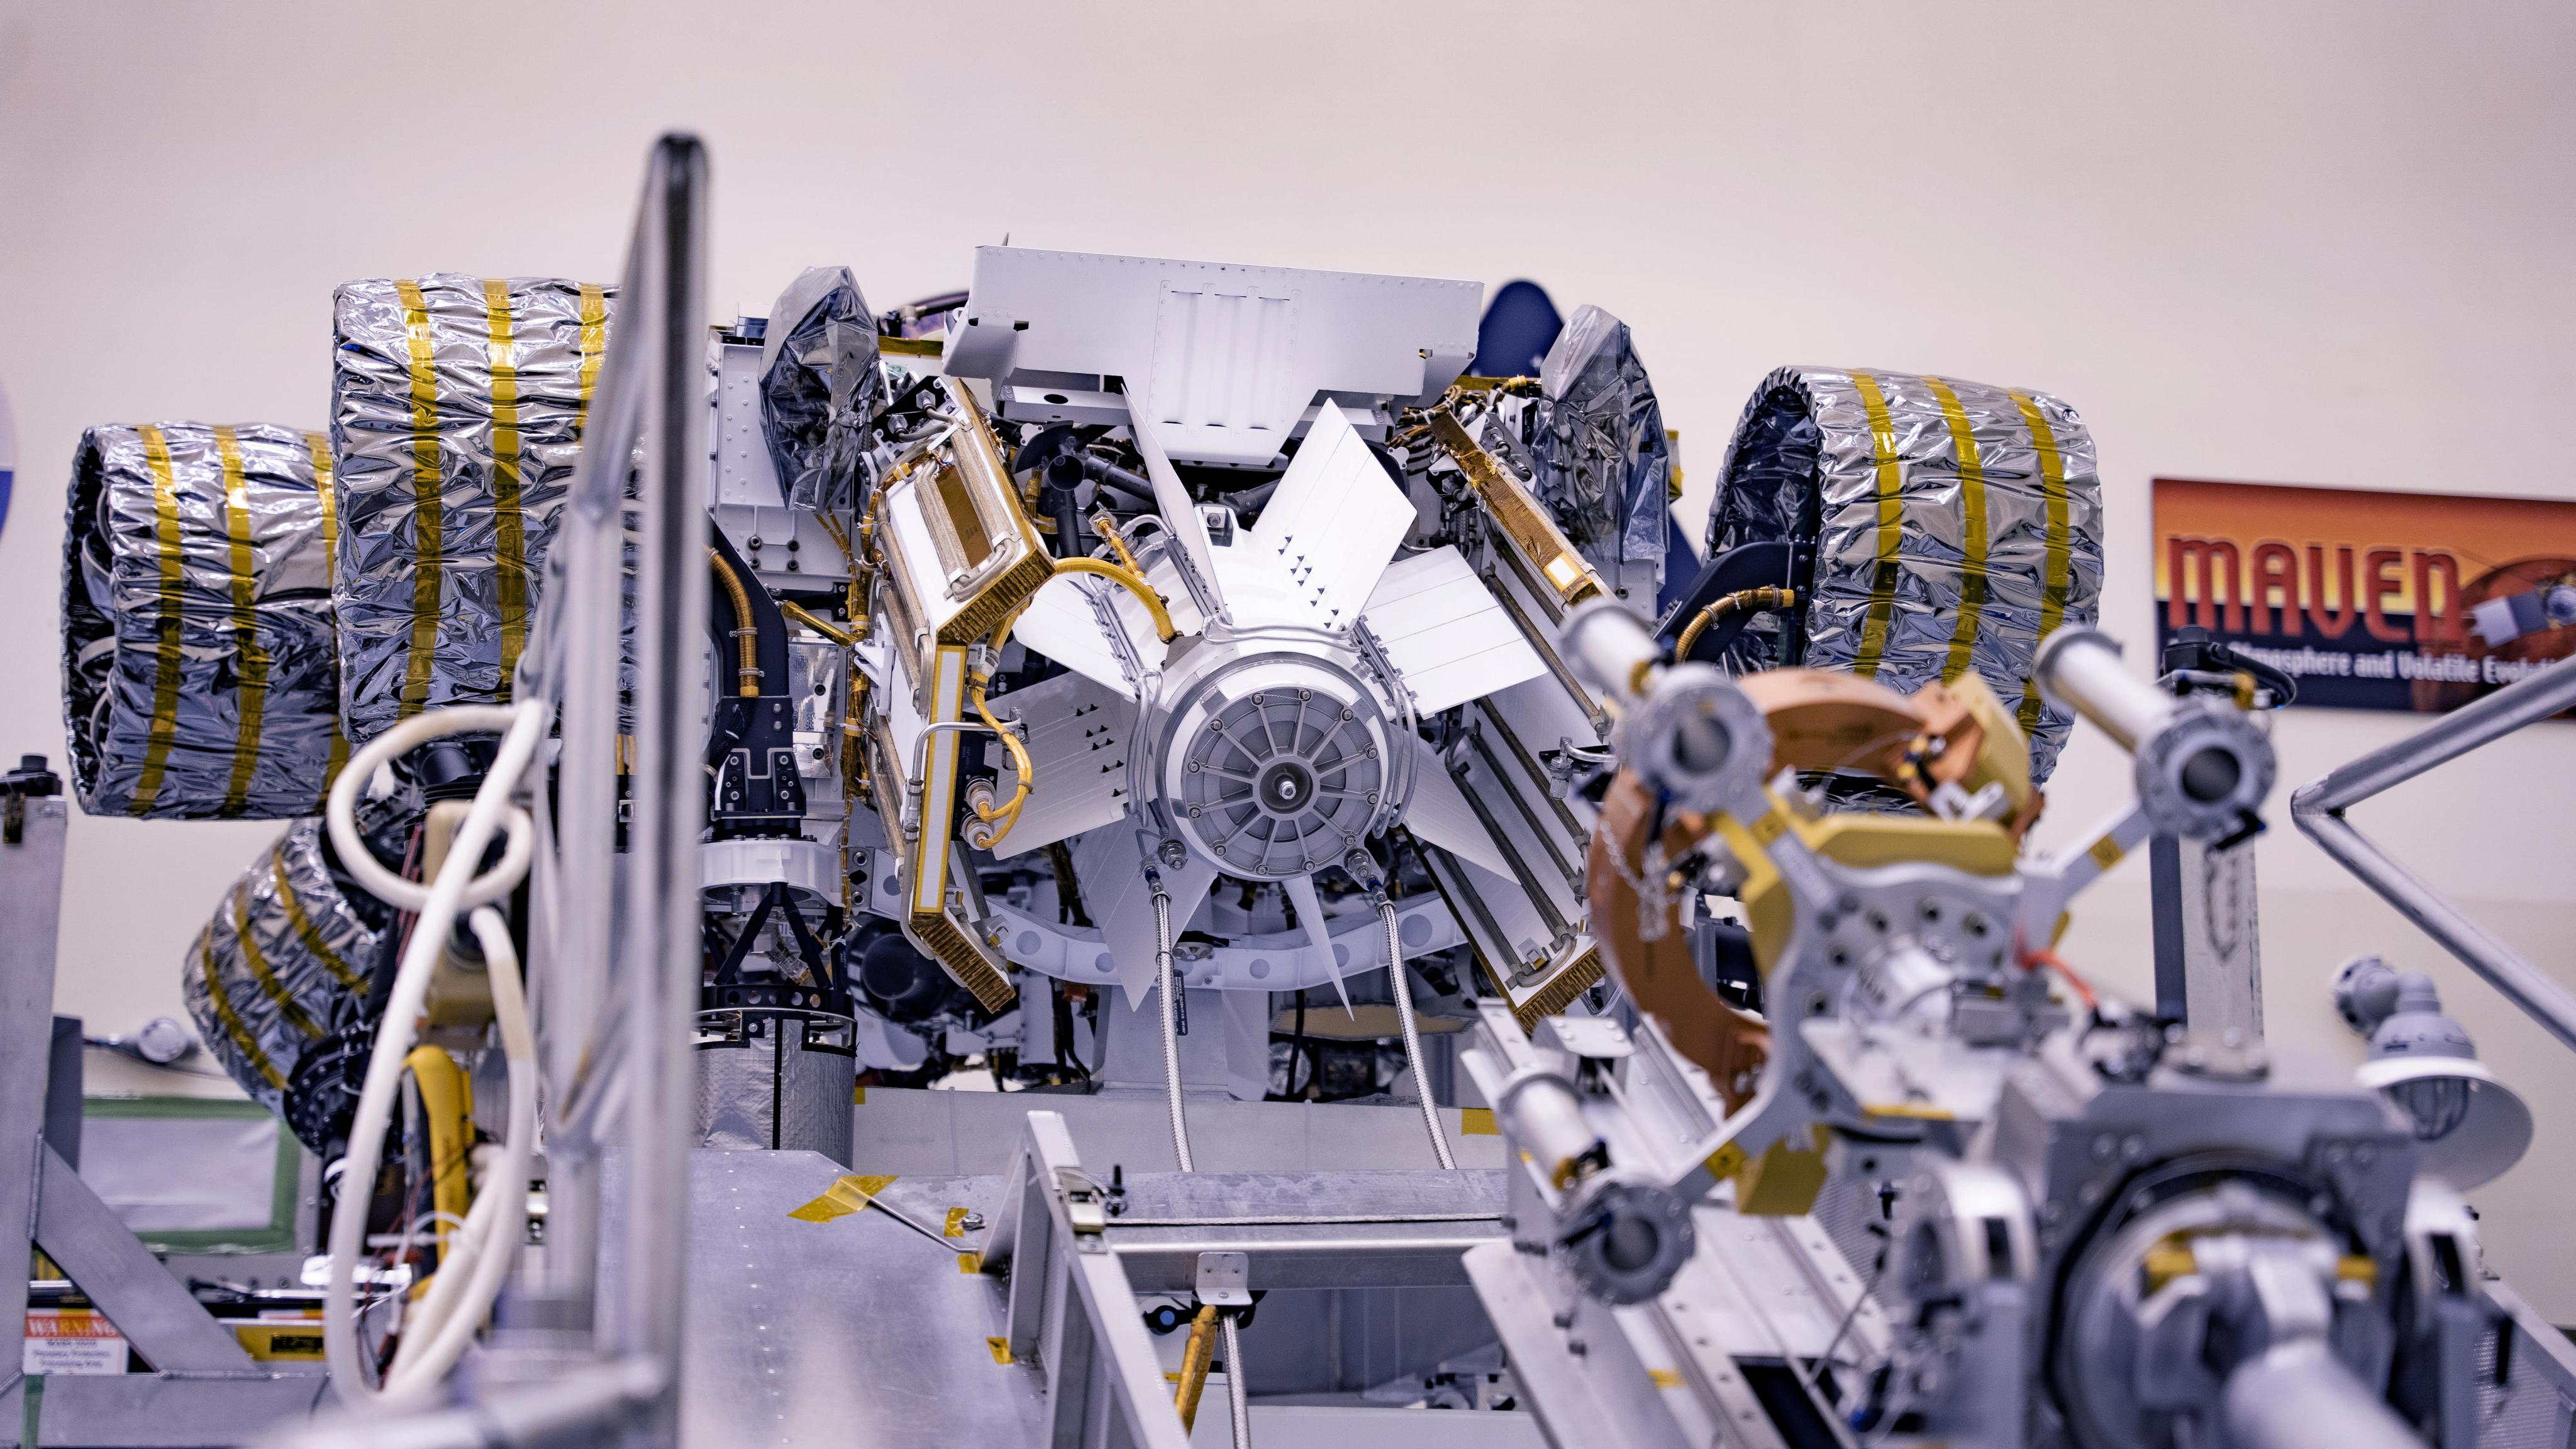 The rover is upside down in this straight from the back view. The image is centered on a cylinder with fins, the spacecraft's Radioisotope Thermoelectric Generator.